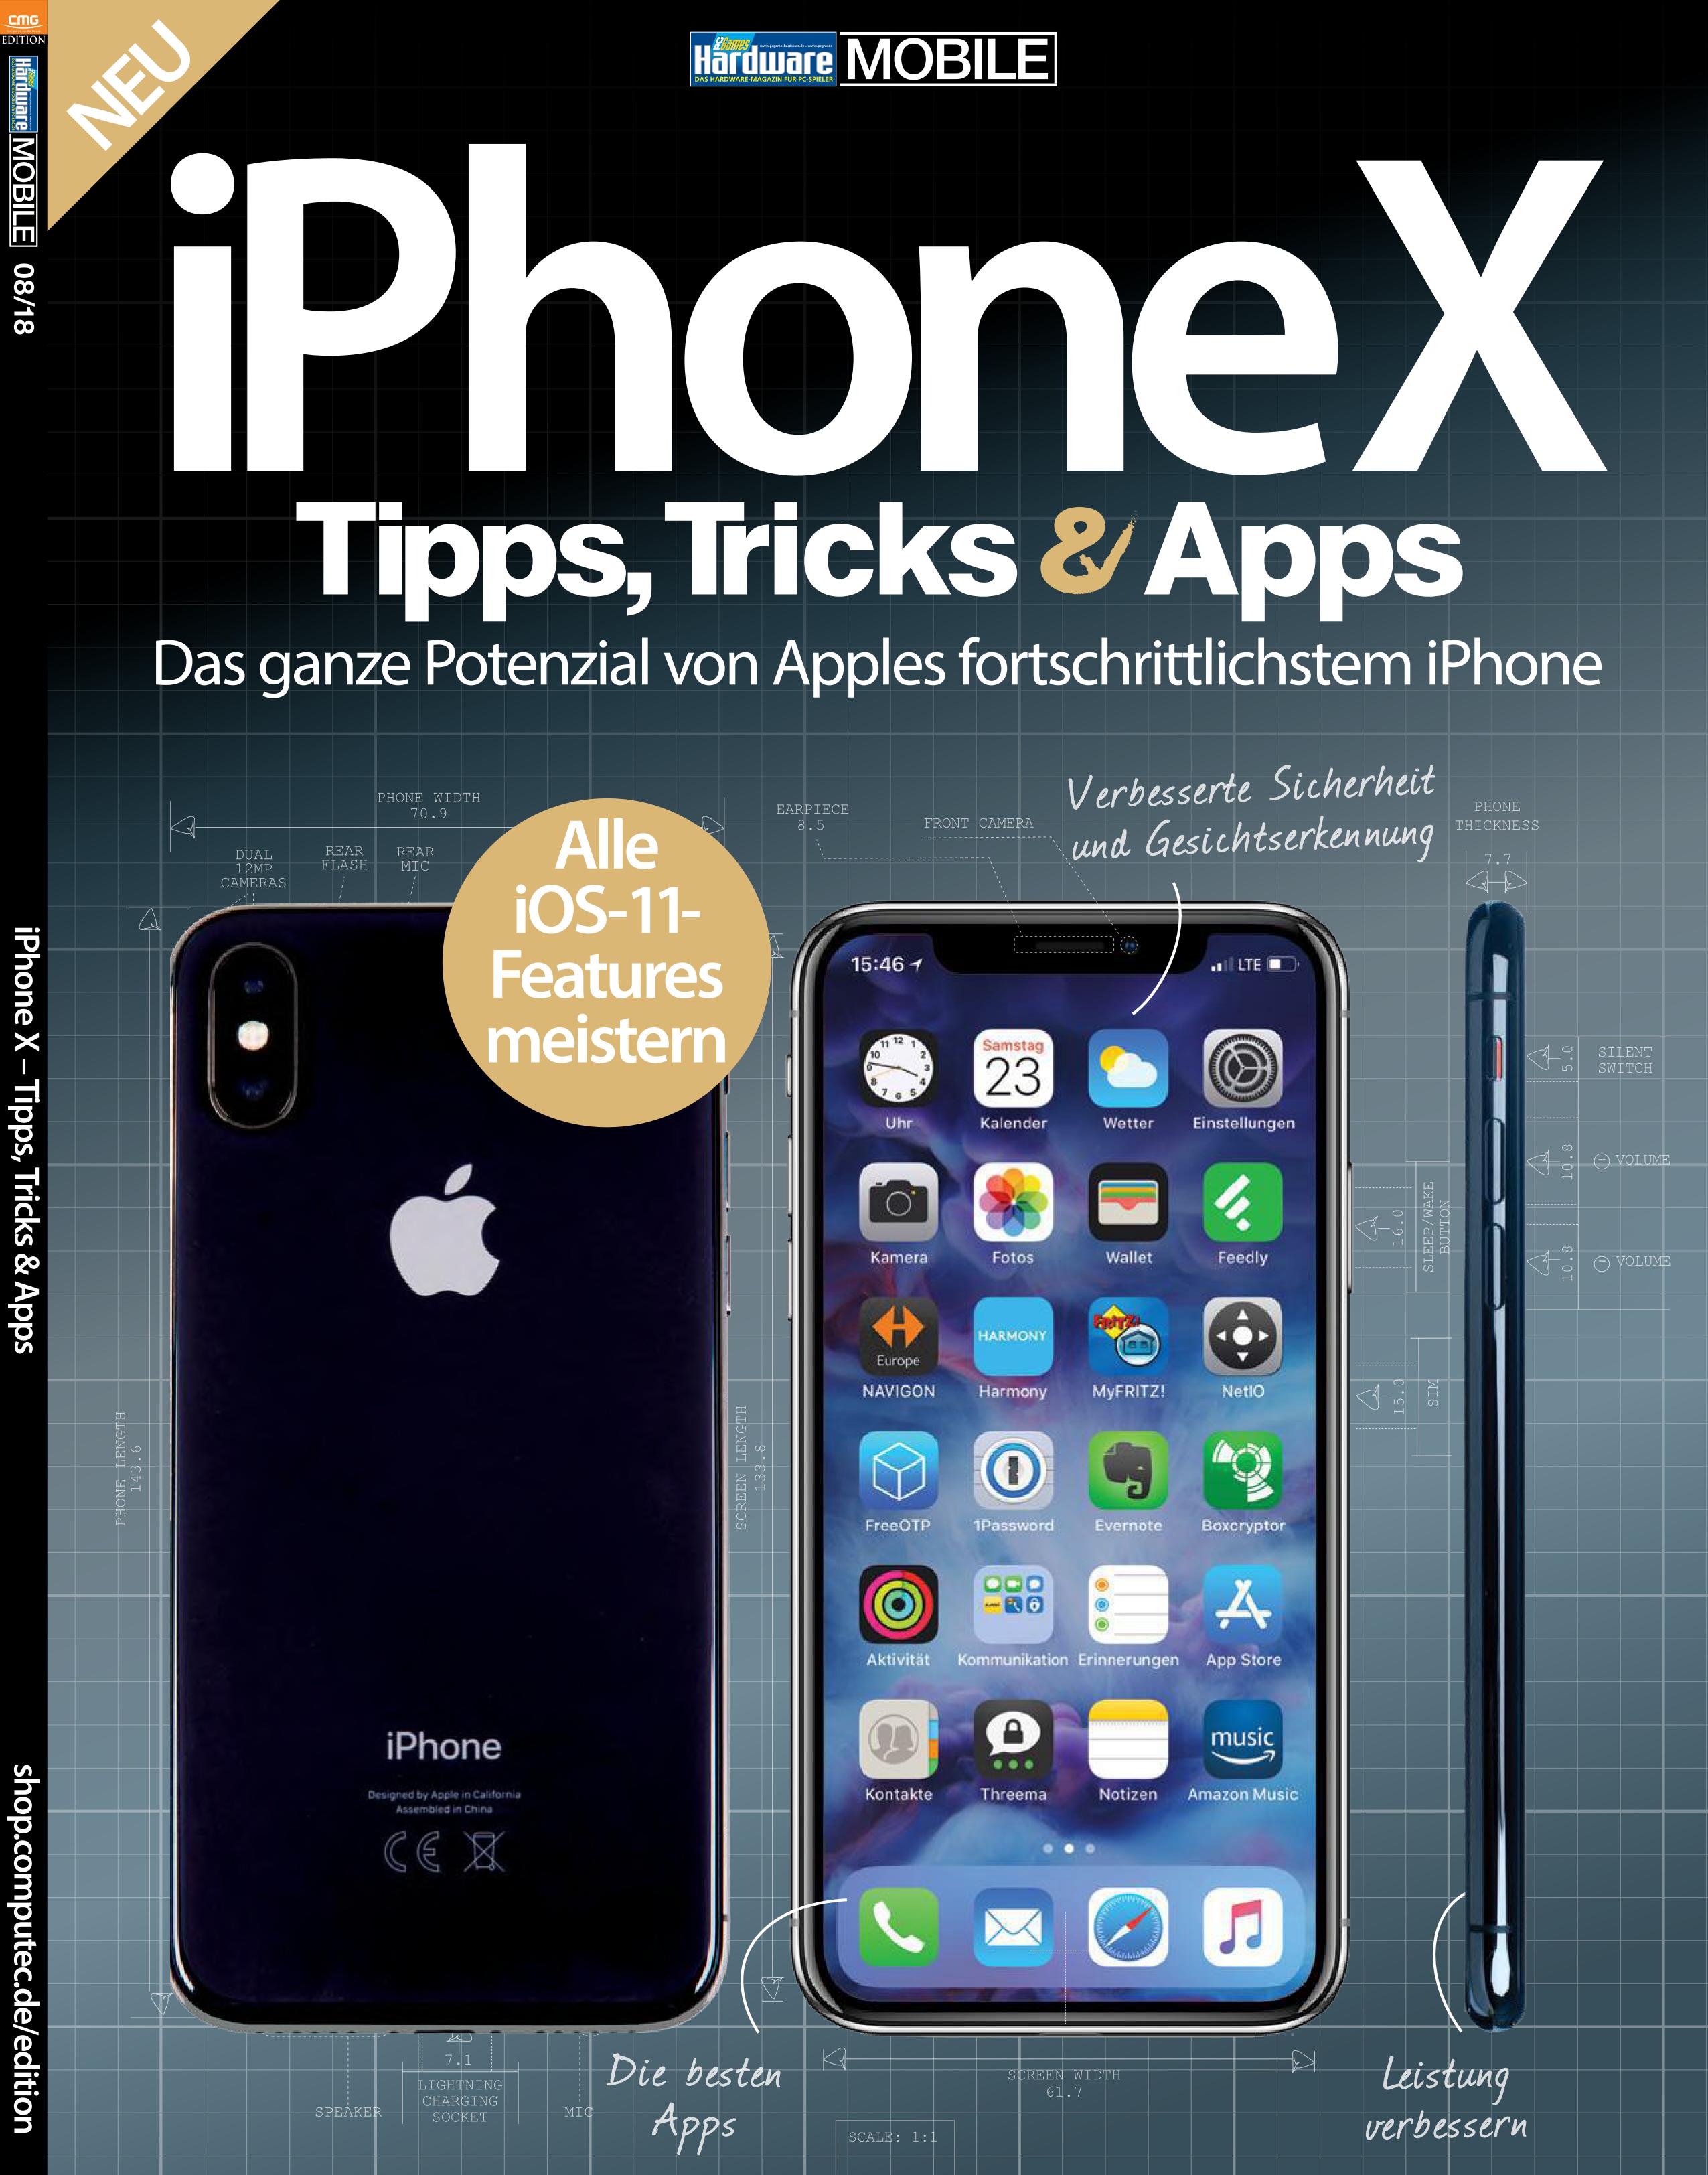 PC Games Hardware Mobile – iPhone X Tipps, Tricks & Apps – Nr.8, 2018